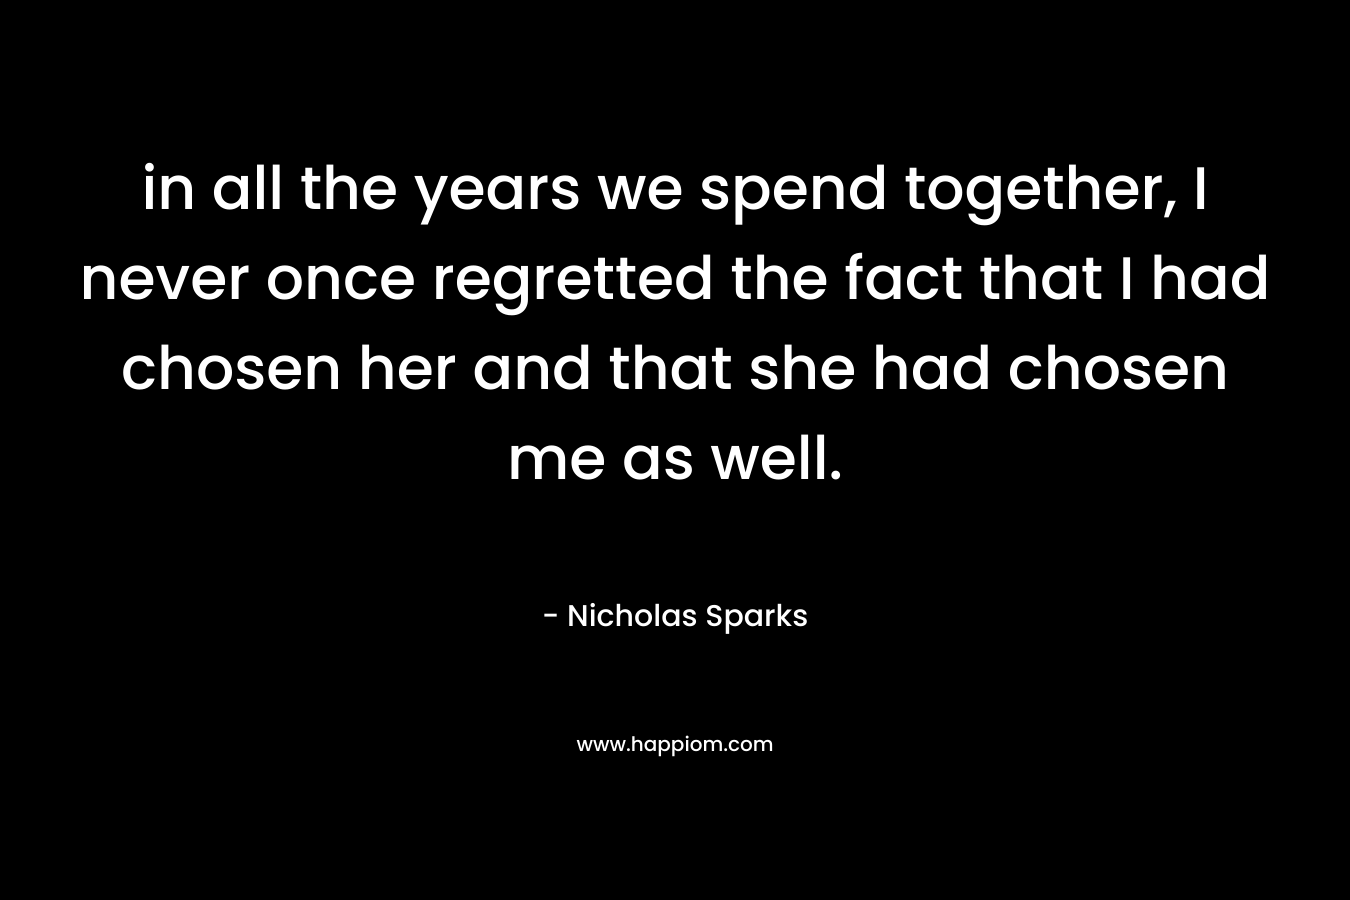 in all the years we spend together, I never once regretted the fact that I had chosen her and that she had chosen me as well. – Nicholas Sparks